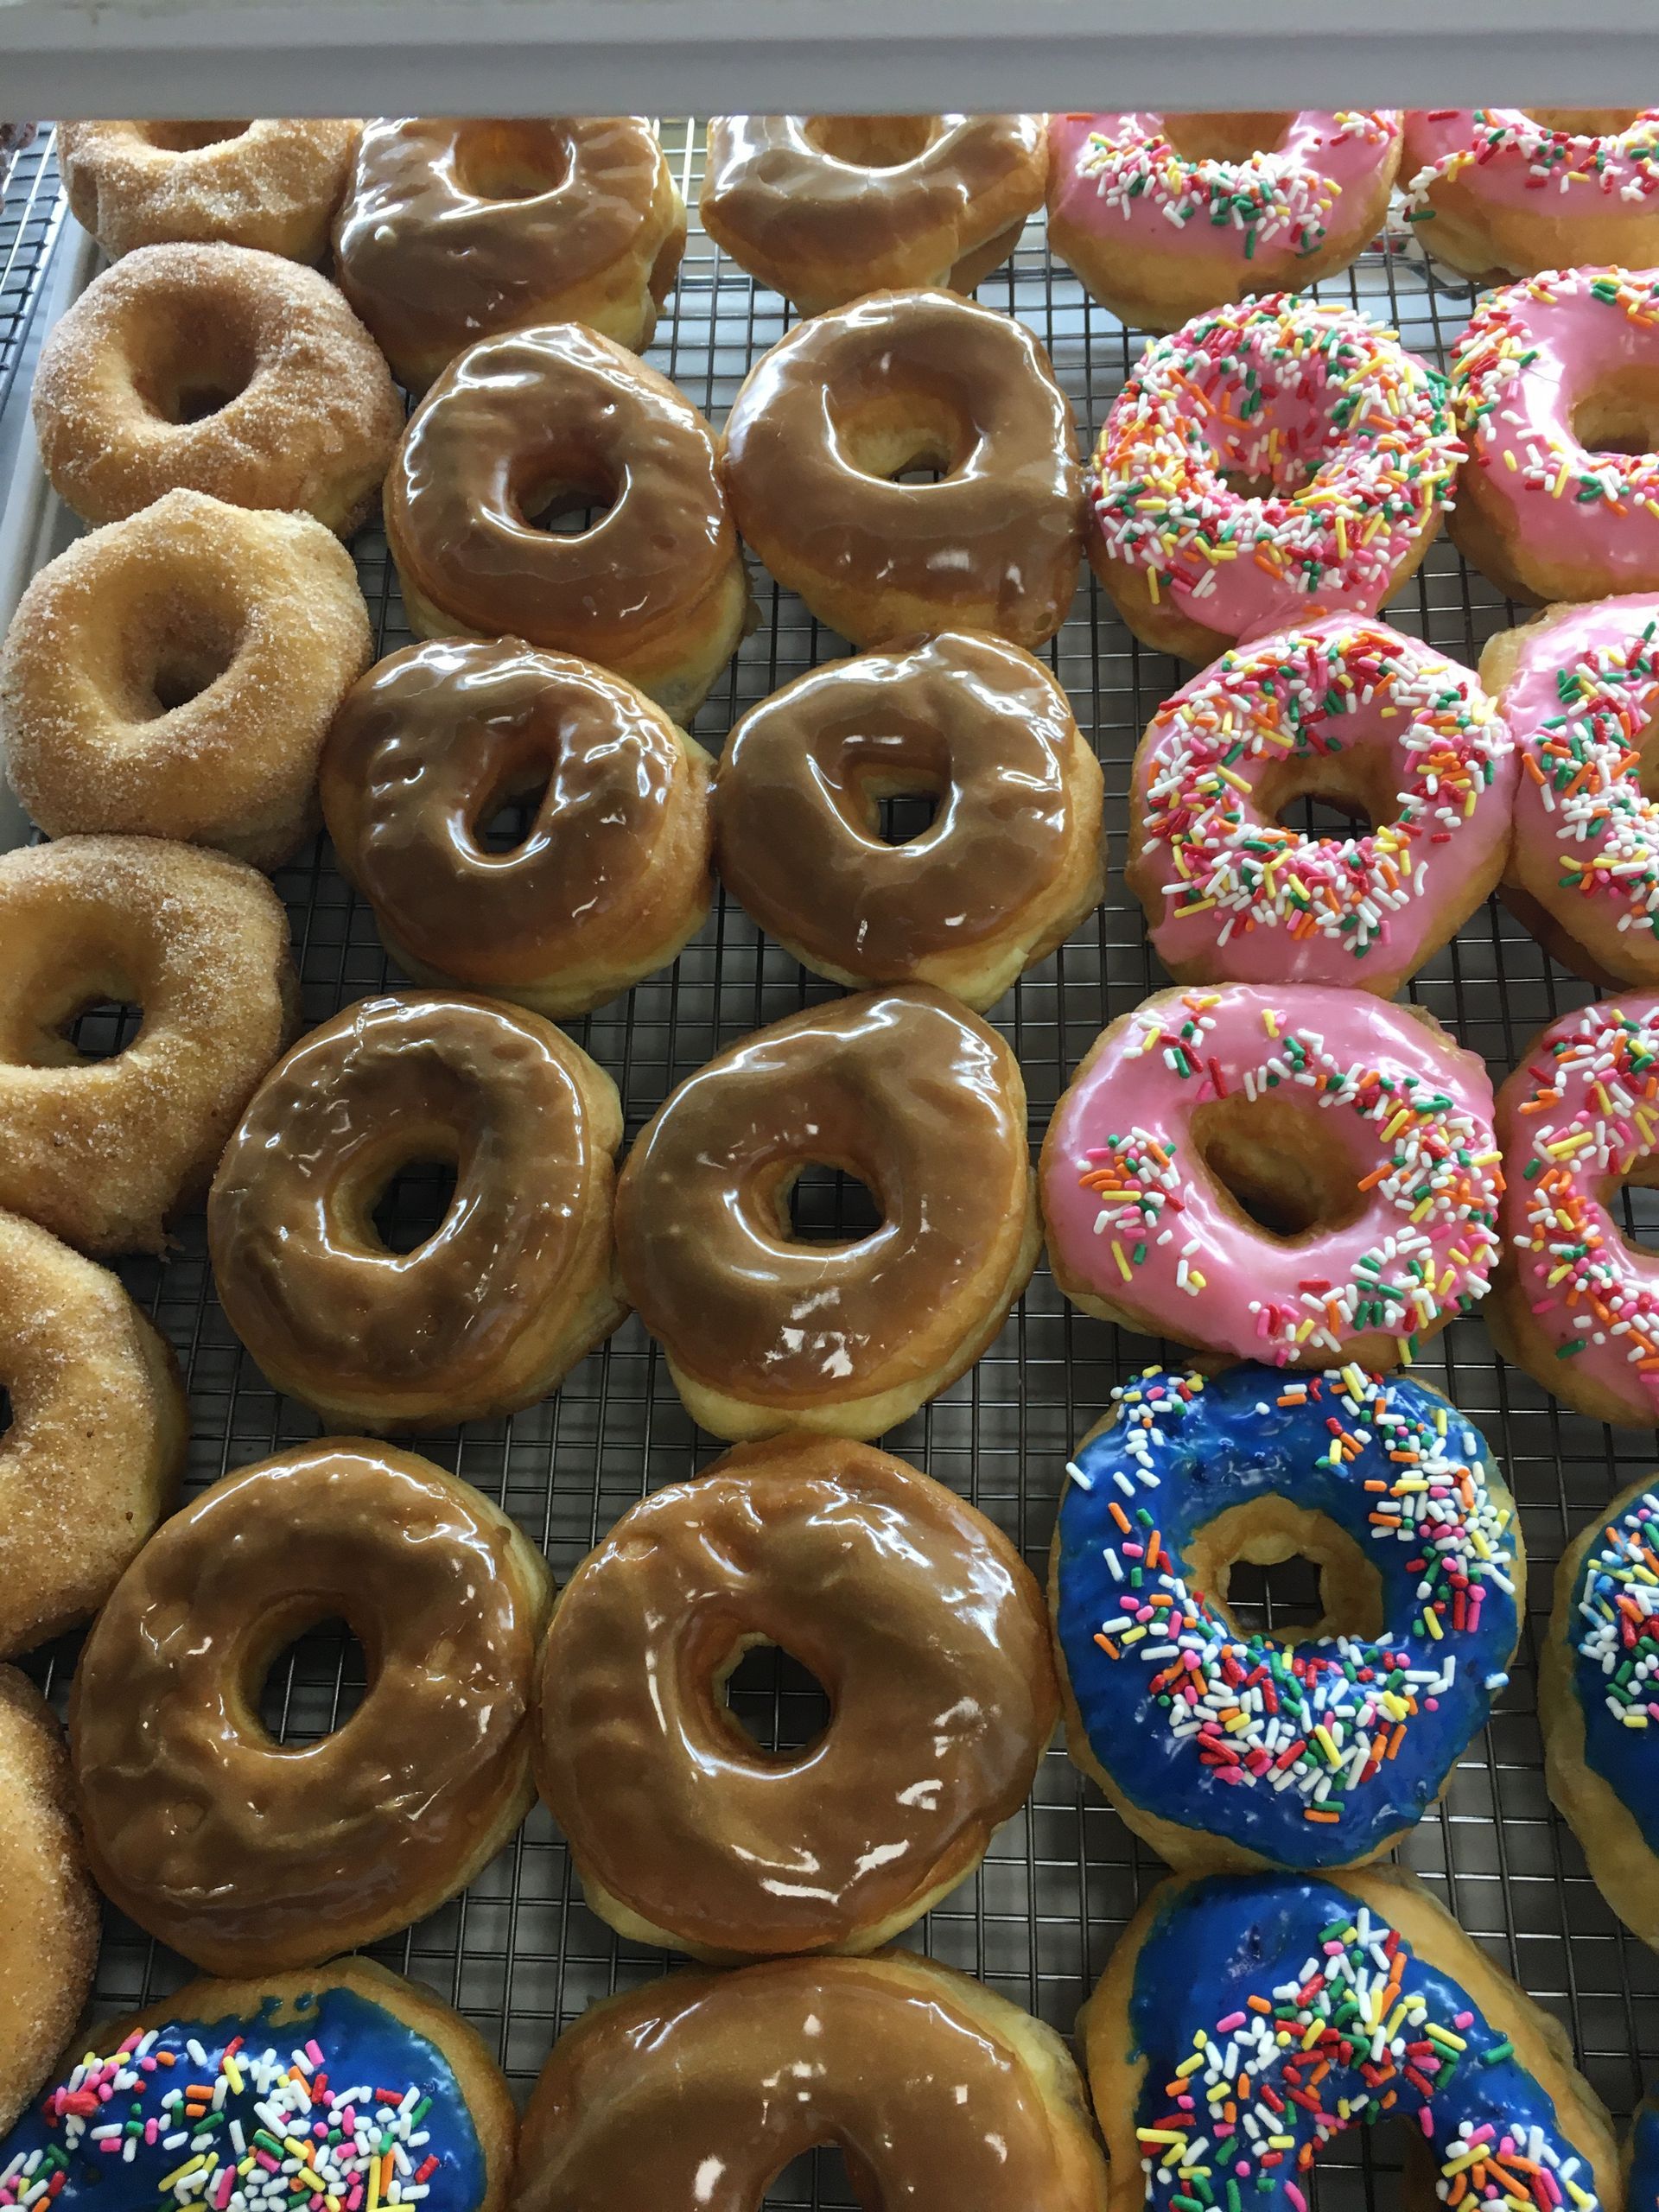 Find delectable donut options at the nearest coffee shop in Ada